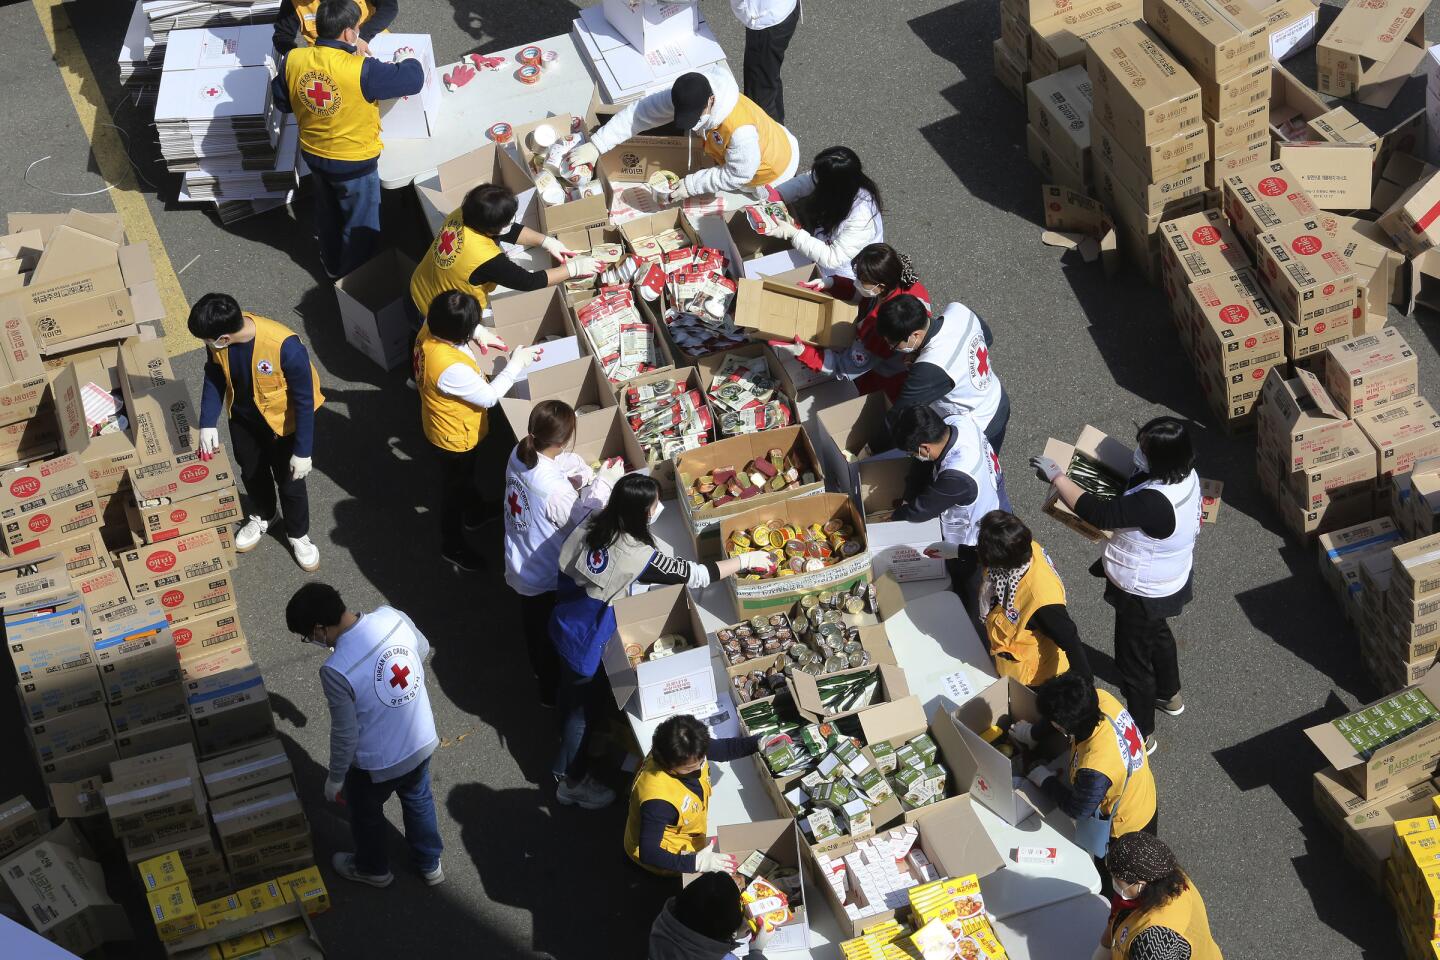 South Korea: Red Cross workers prepare emergency relief kits packed with basic necessities like instant food for delivery to impoverished people experiencing difficulties amid the spread of the new coronavirus.